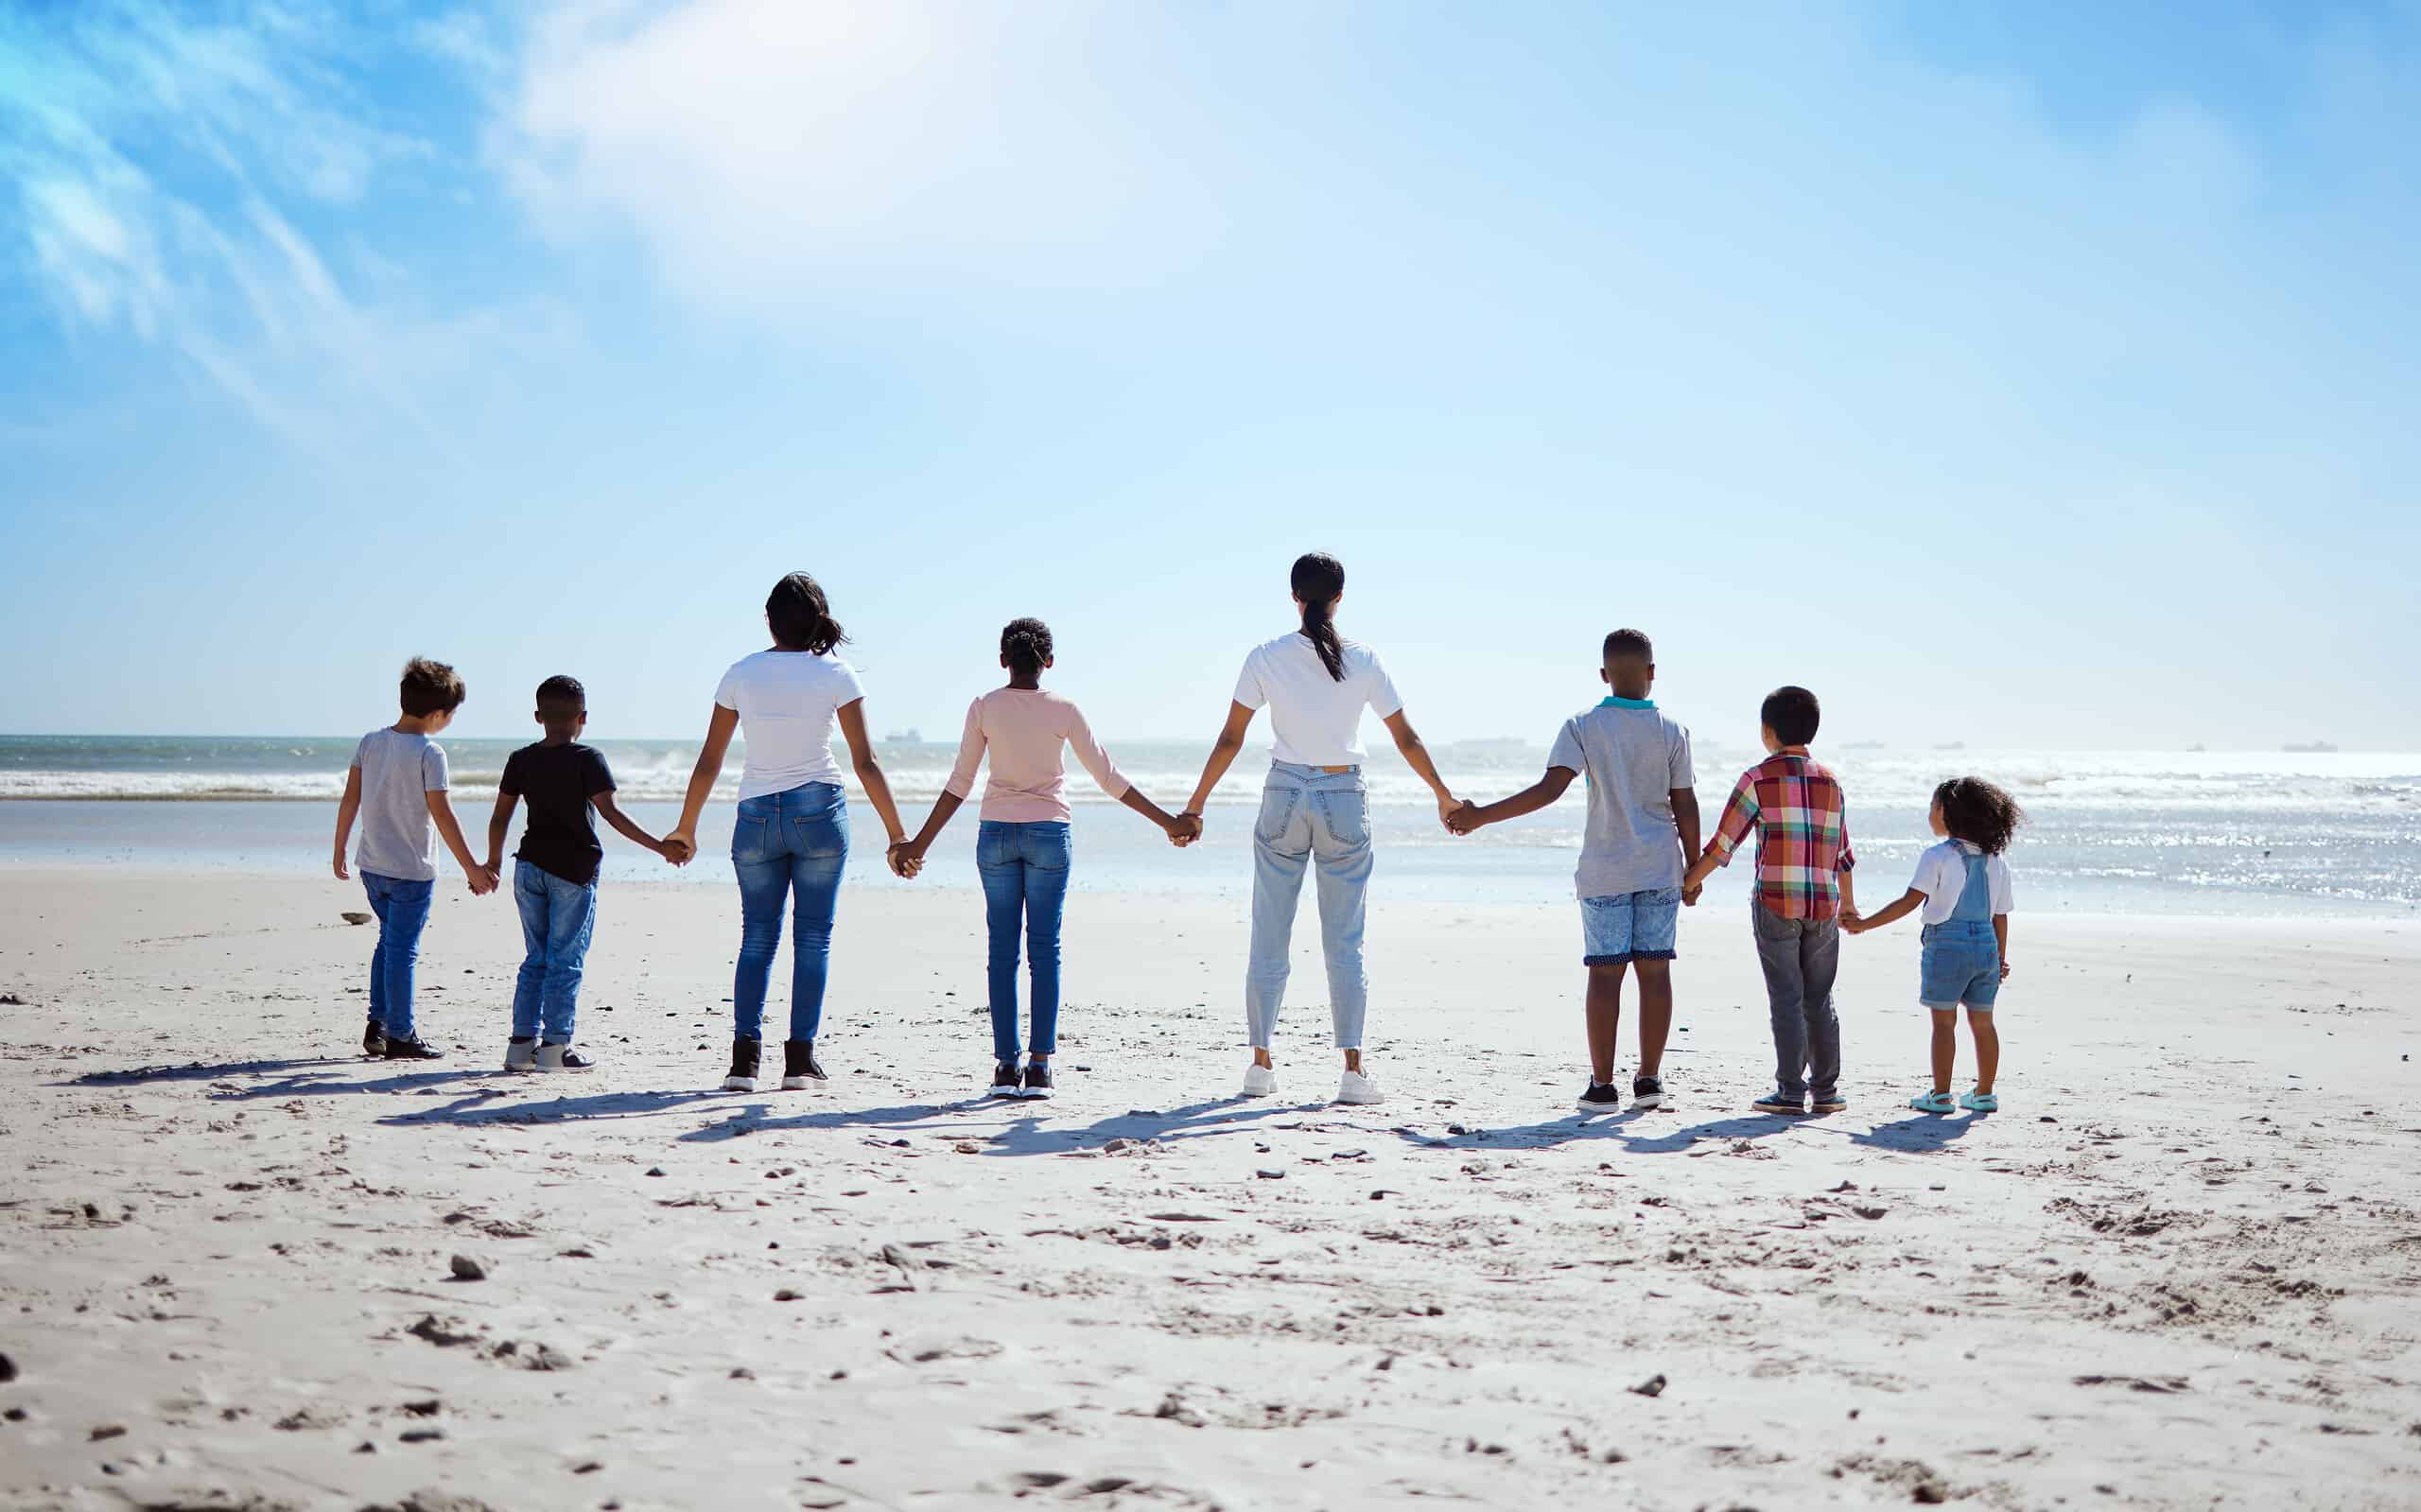 Support, back and big family holding hands at the beach, summer walking and travel holiday in nature of Portugal. Hope, love and women with affection for adopted kids on a vacation at the ocean